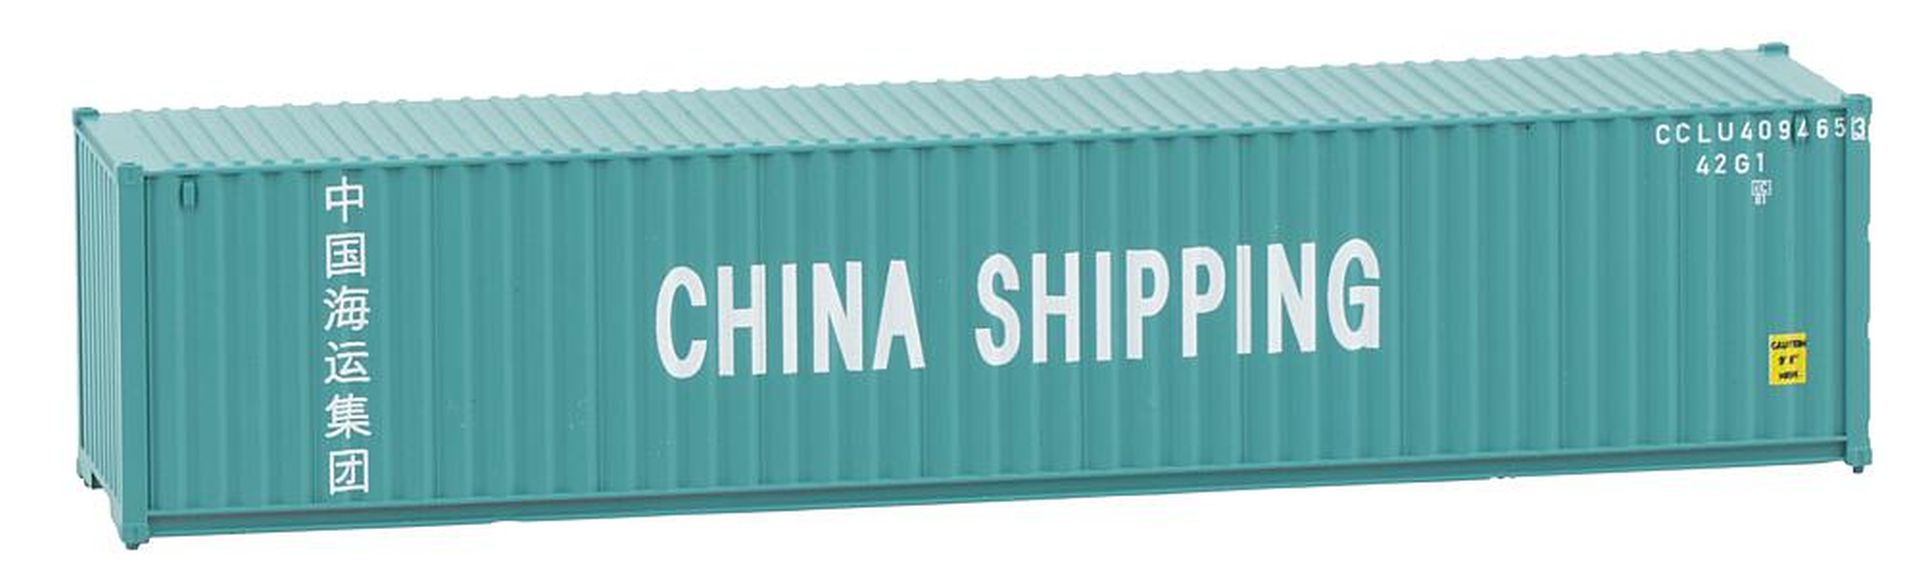 Faller 182101 - 40' Container CHINA SHIPPING